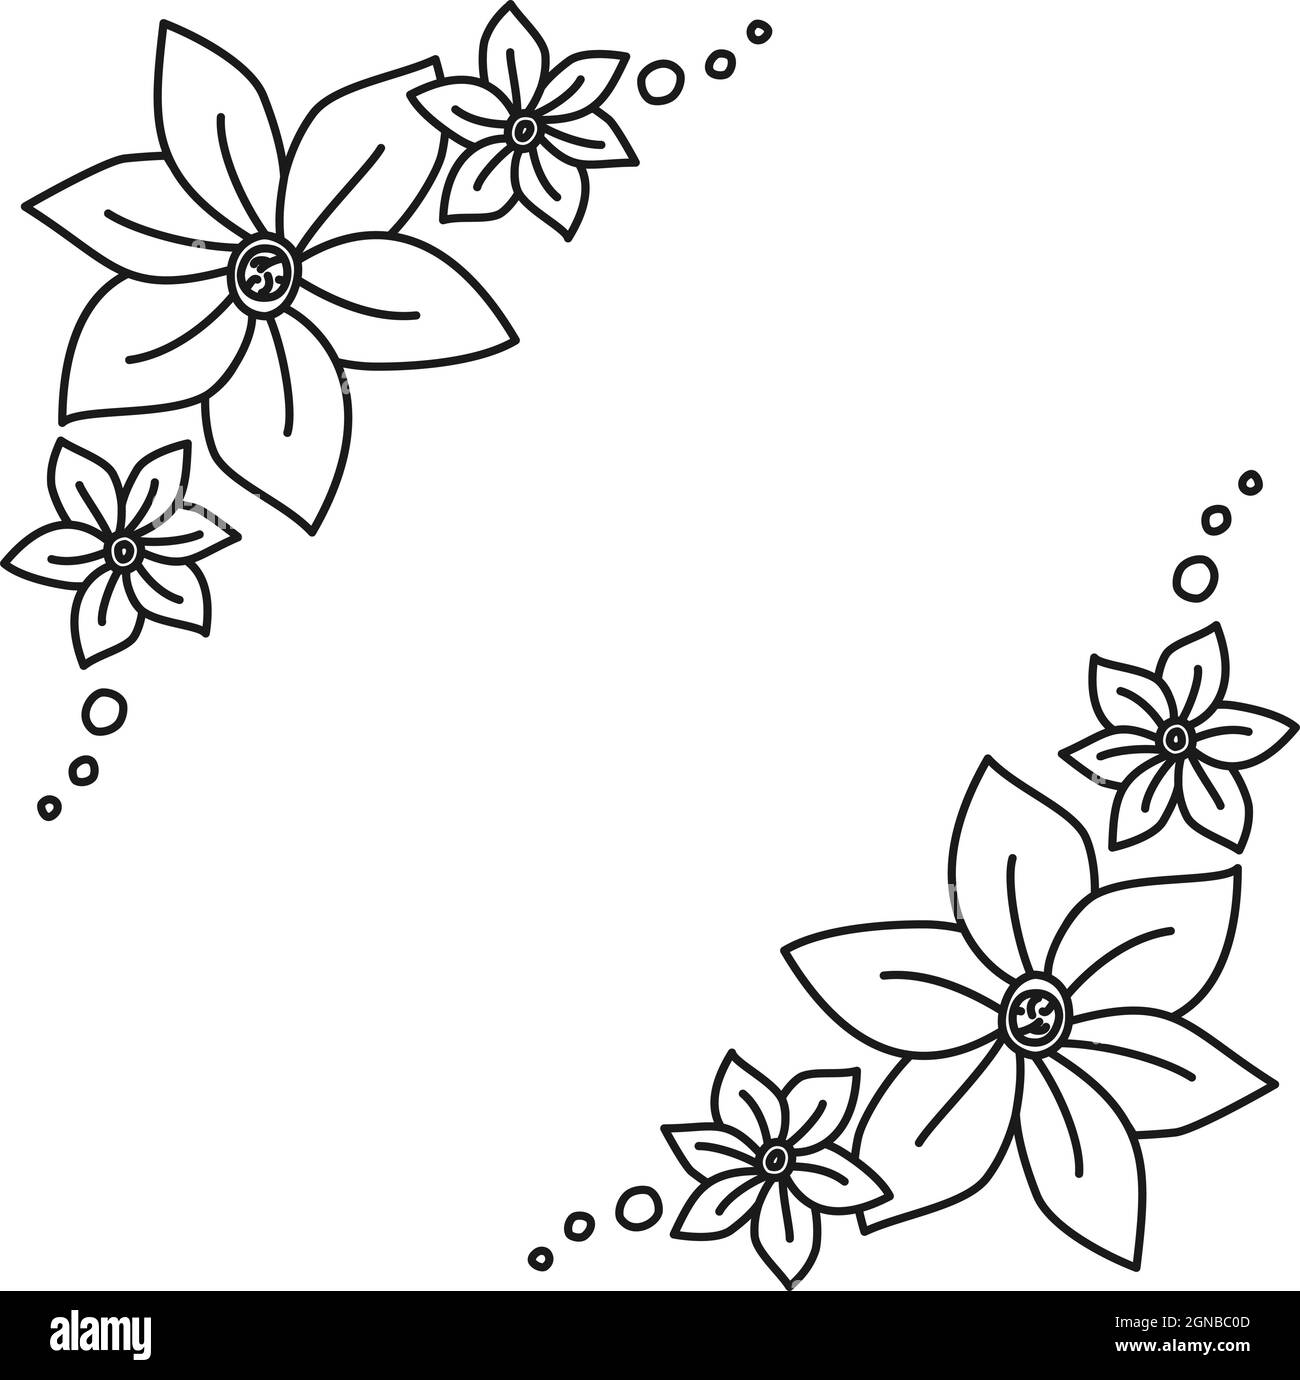 Cute Nature Coloring Book Seamless Vector Pattern Design